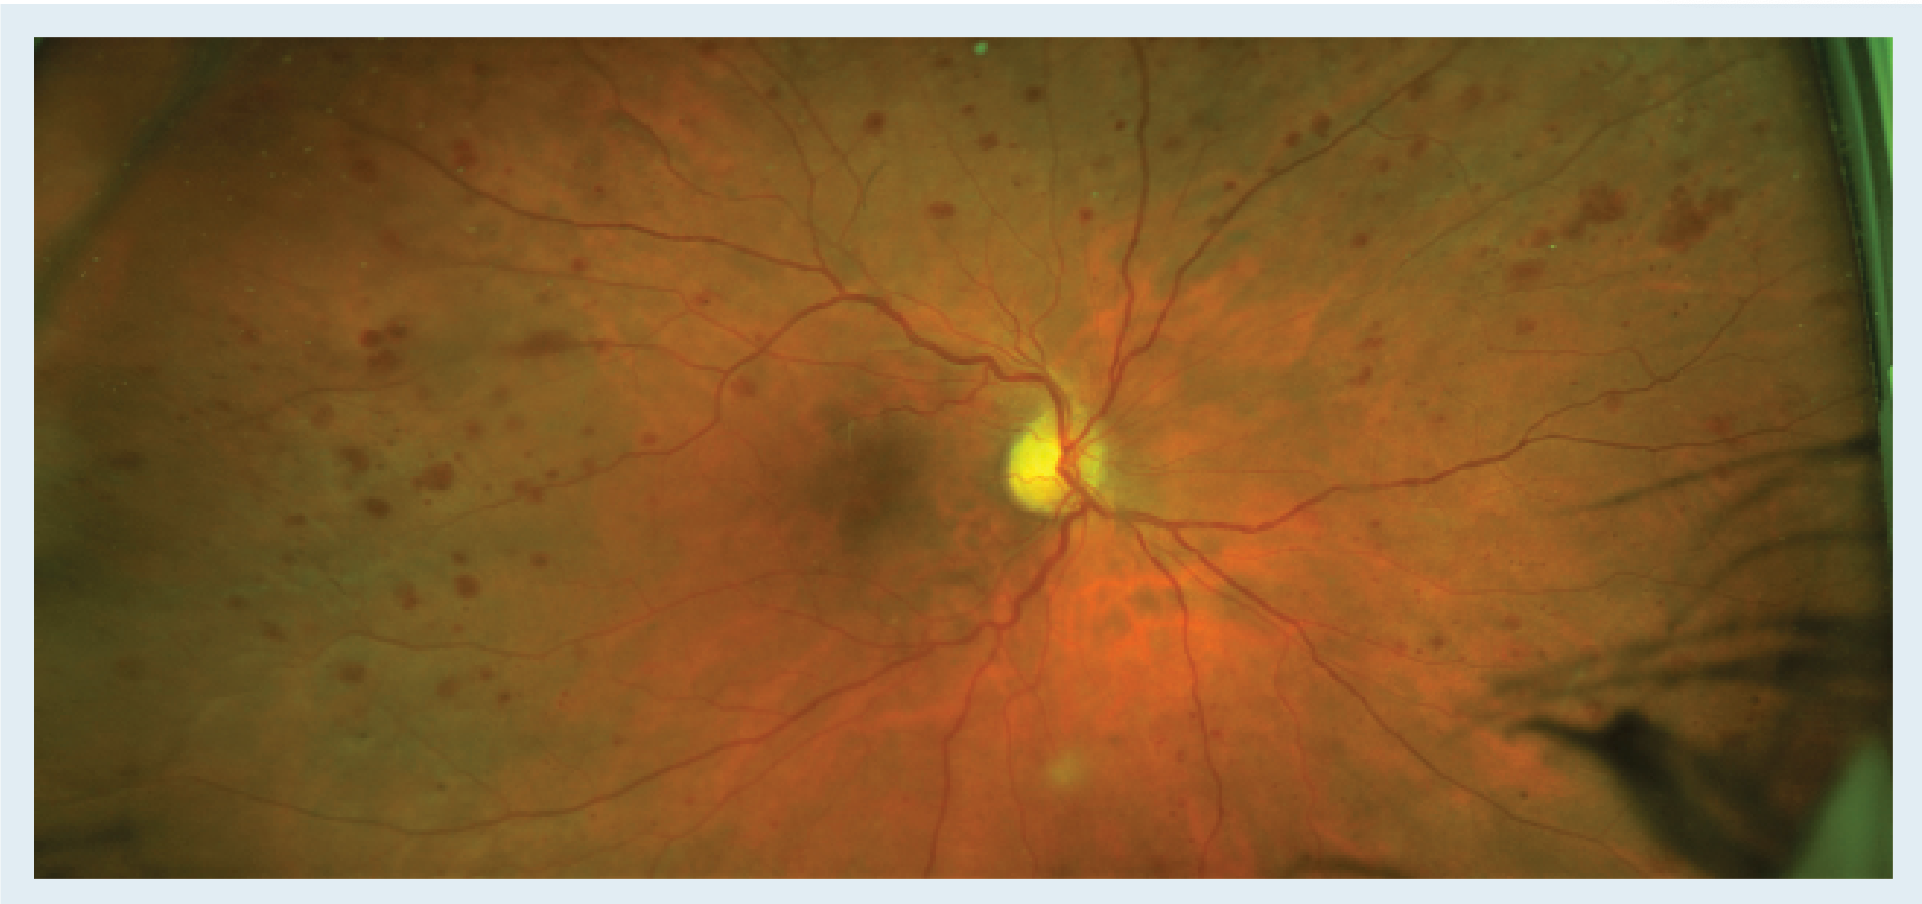 Figure. Here is an example of a patient with predominantly peripheral lesions using ultra-widefield color retinal imaging. Although DRCR.net Protocol AA found that this does not predict significant progression over 4 years, the abundance of peripheral lesions seen here compared to those seen in the posterior pole supports a diagnosis of severe nonproliferative diabetic retinopathy, as well as closer monitoring and/or referral to a retinal specialist and consideration for anti-VEGF therapy. (Image courtesy of A. Paul Chous, OD, MA, FAAO)